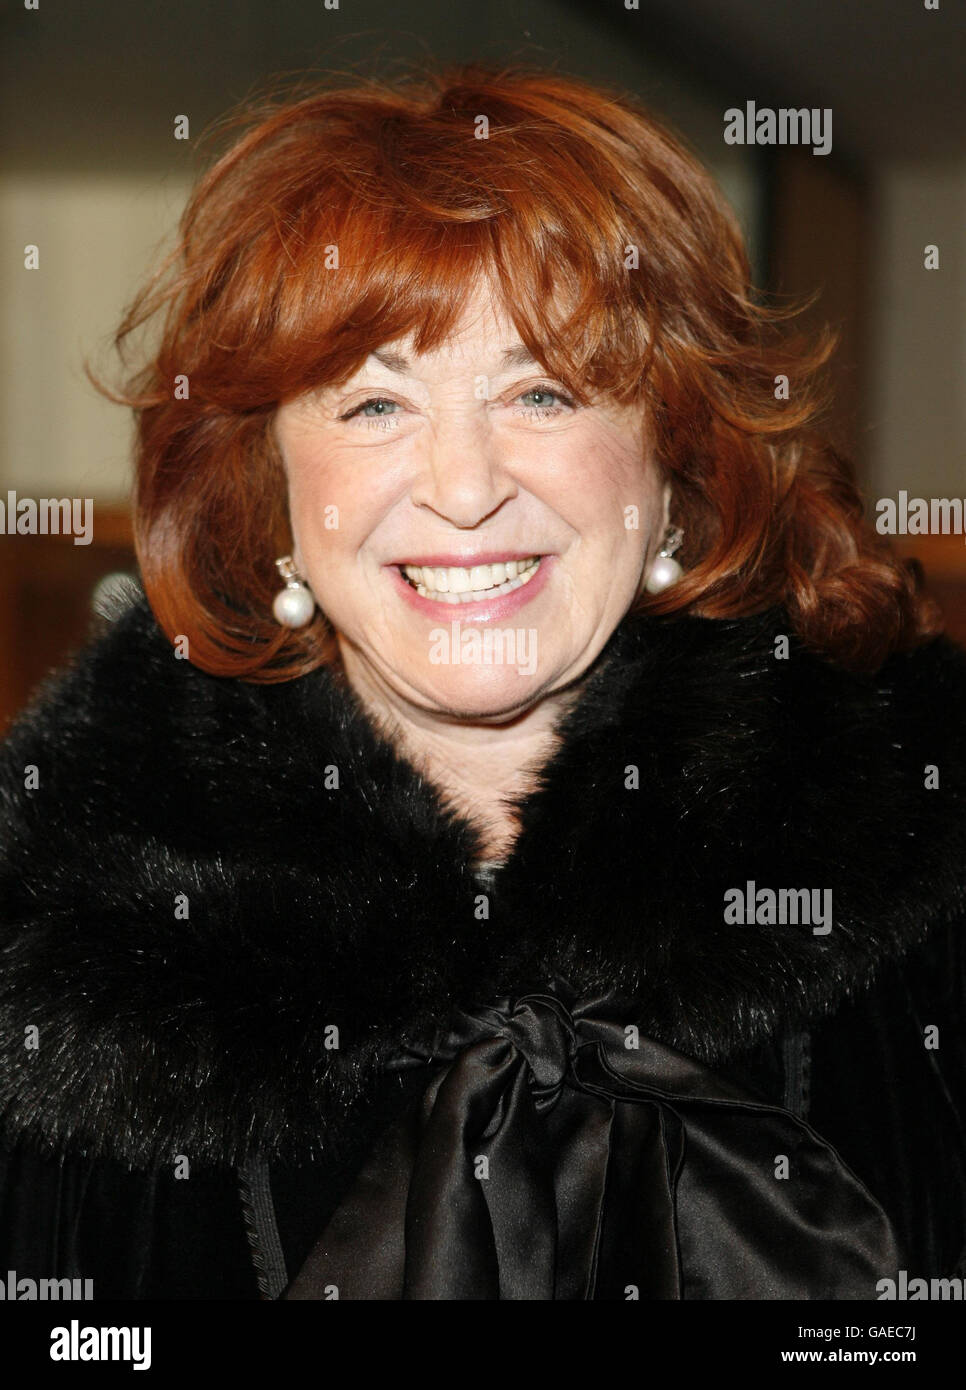 Women in Film and Television Awards - London. Lynda la Plante arrives at the Women in Film and Television Awards at The Hilton Hotel in central London. Stock Photo